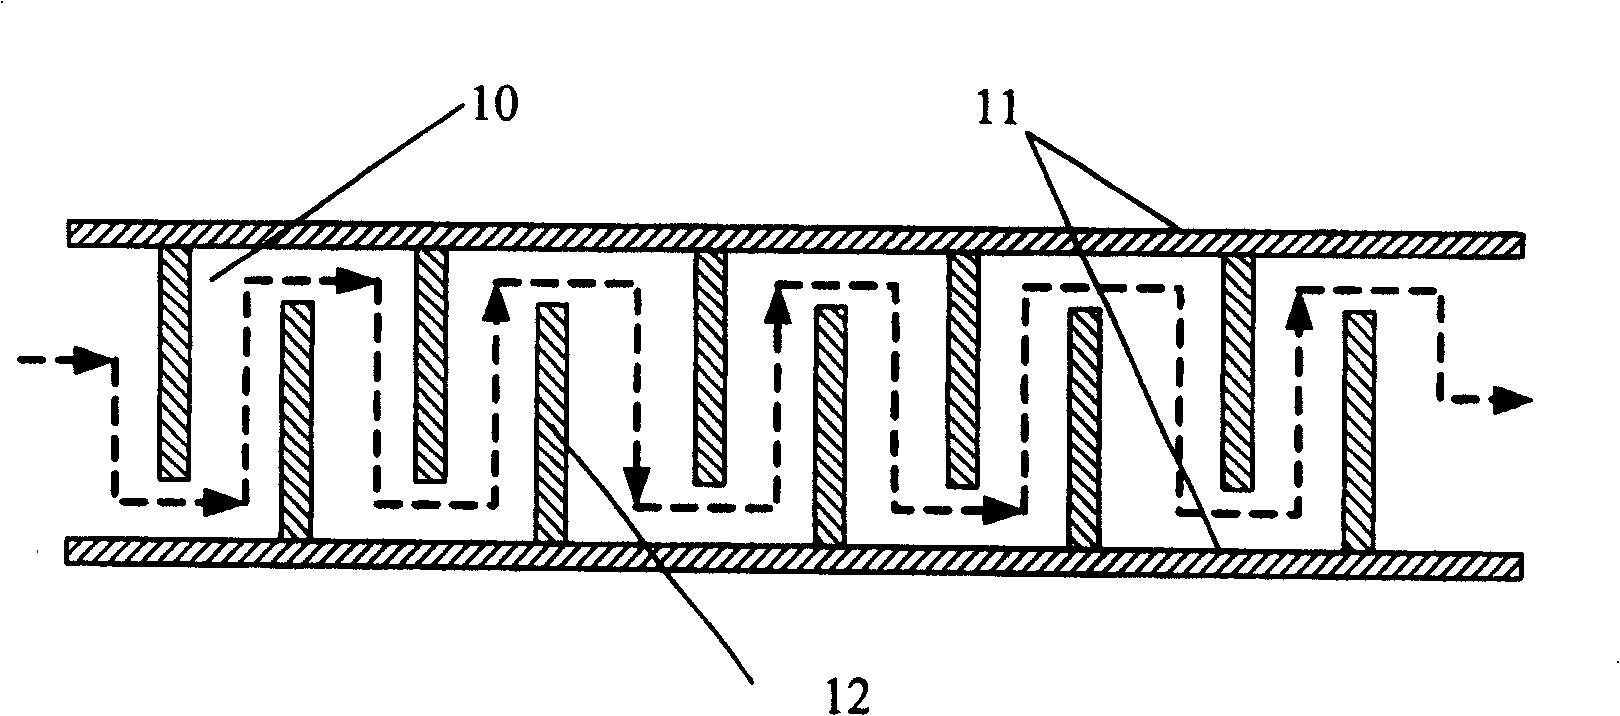 Magnetic control melting electrode welding method, and its developed application, and its universal equipment